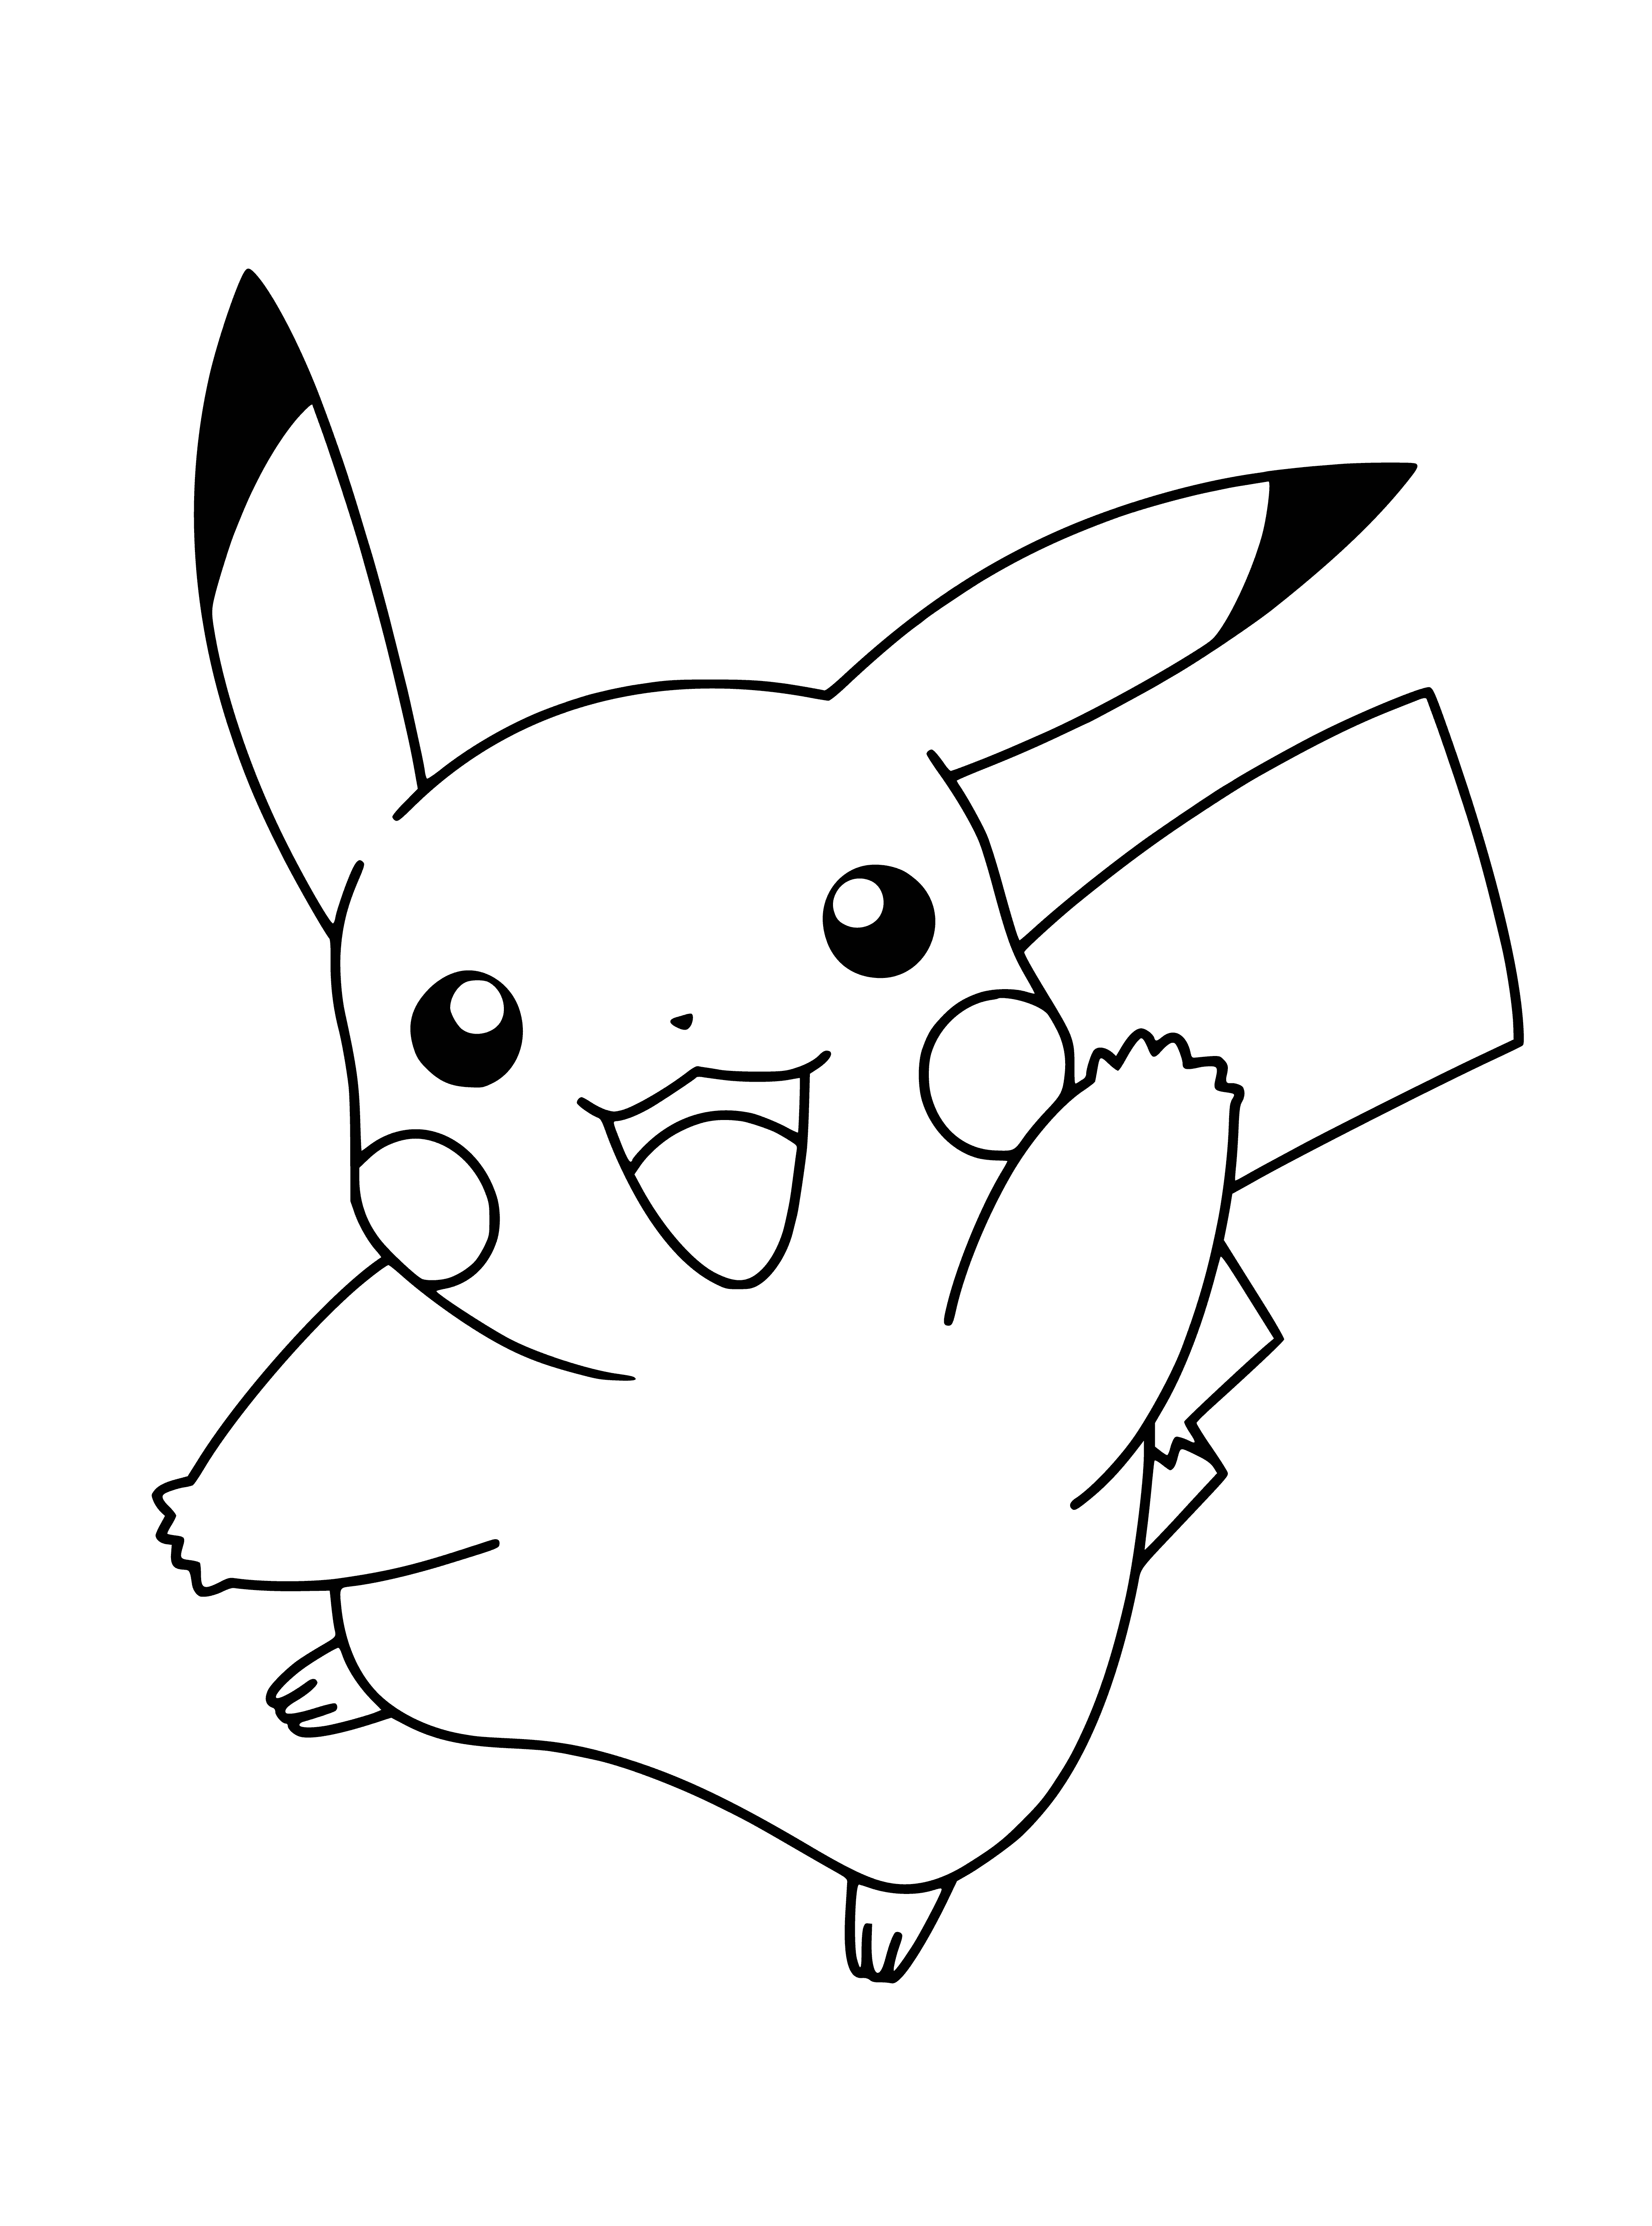 coloring page: Pikachu is a popular yellow creature from Pokemon with pointy ears, red cheeks, and a curly tail. #Pokemon #Pikachu